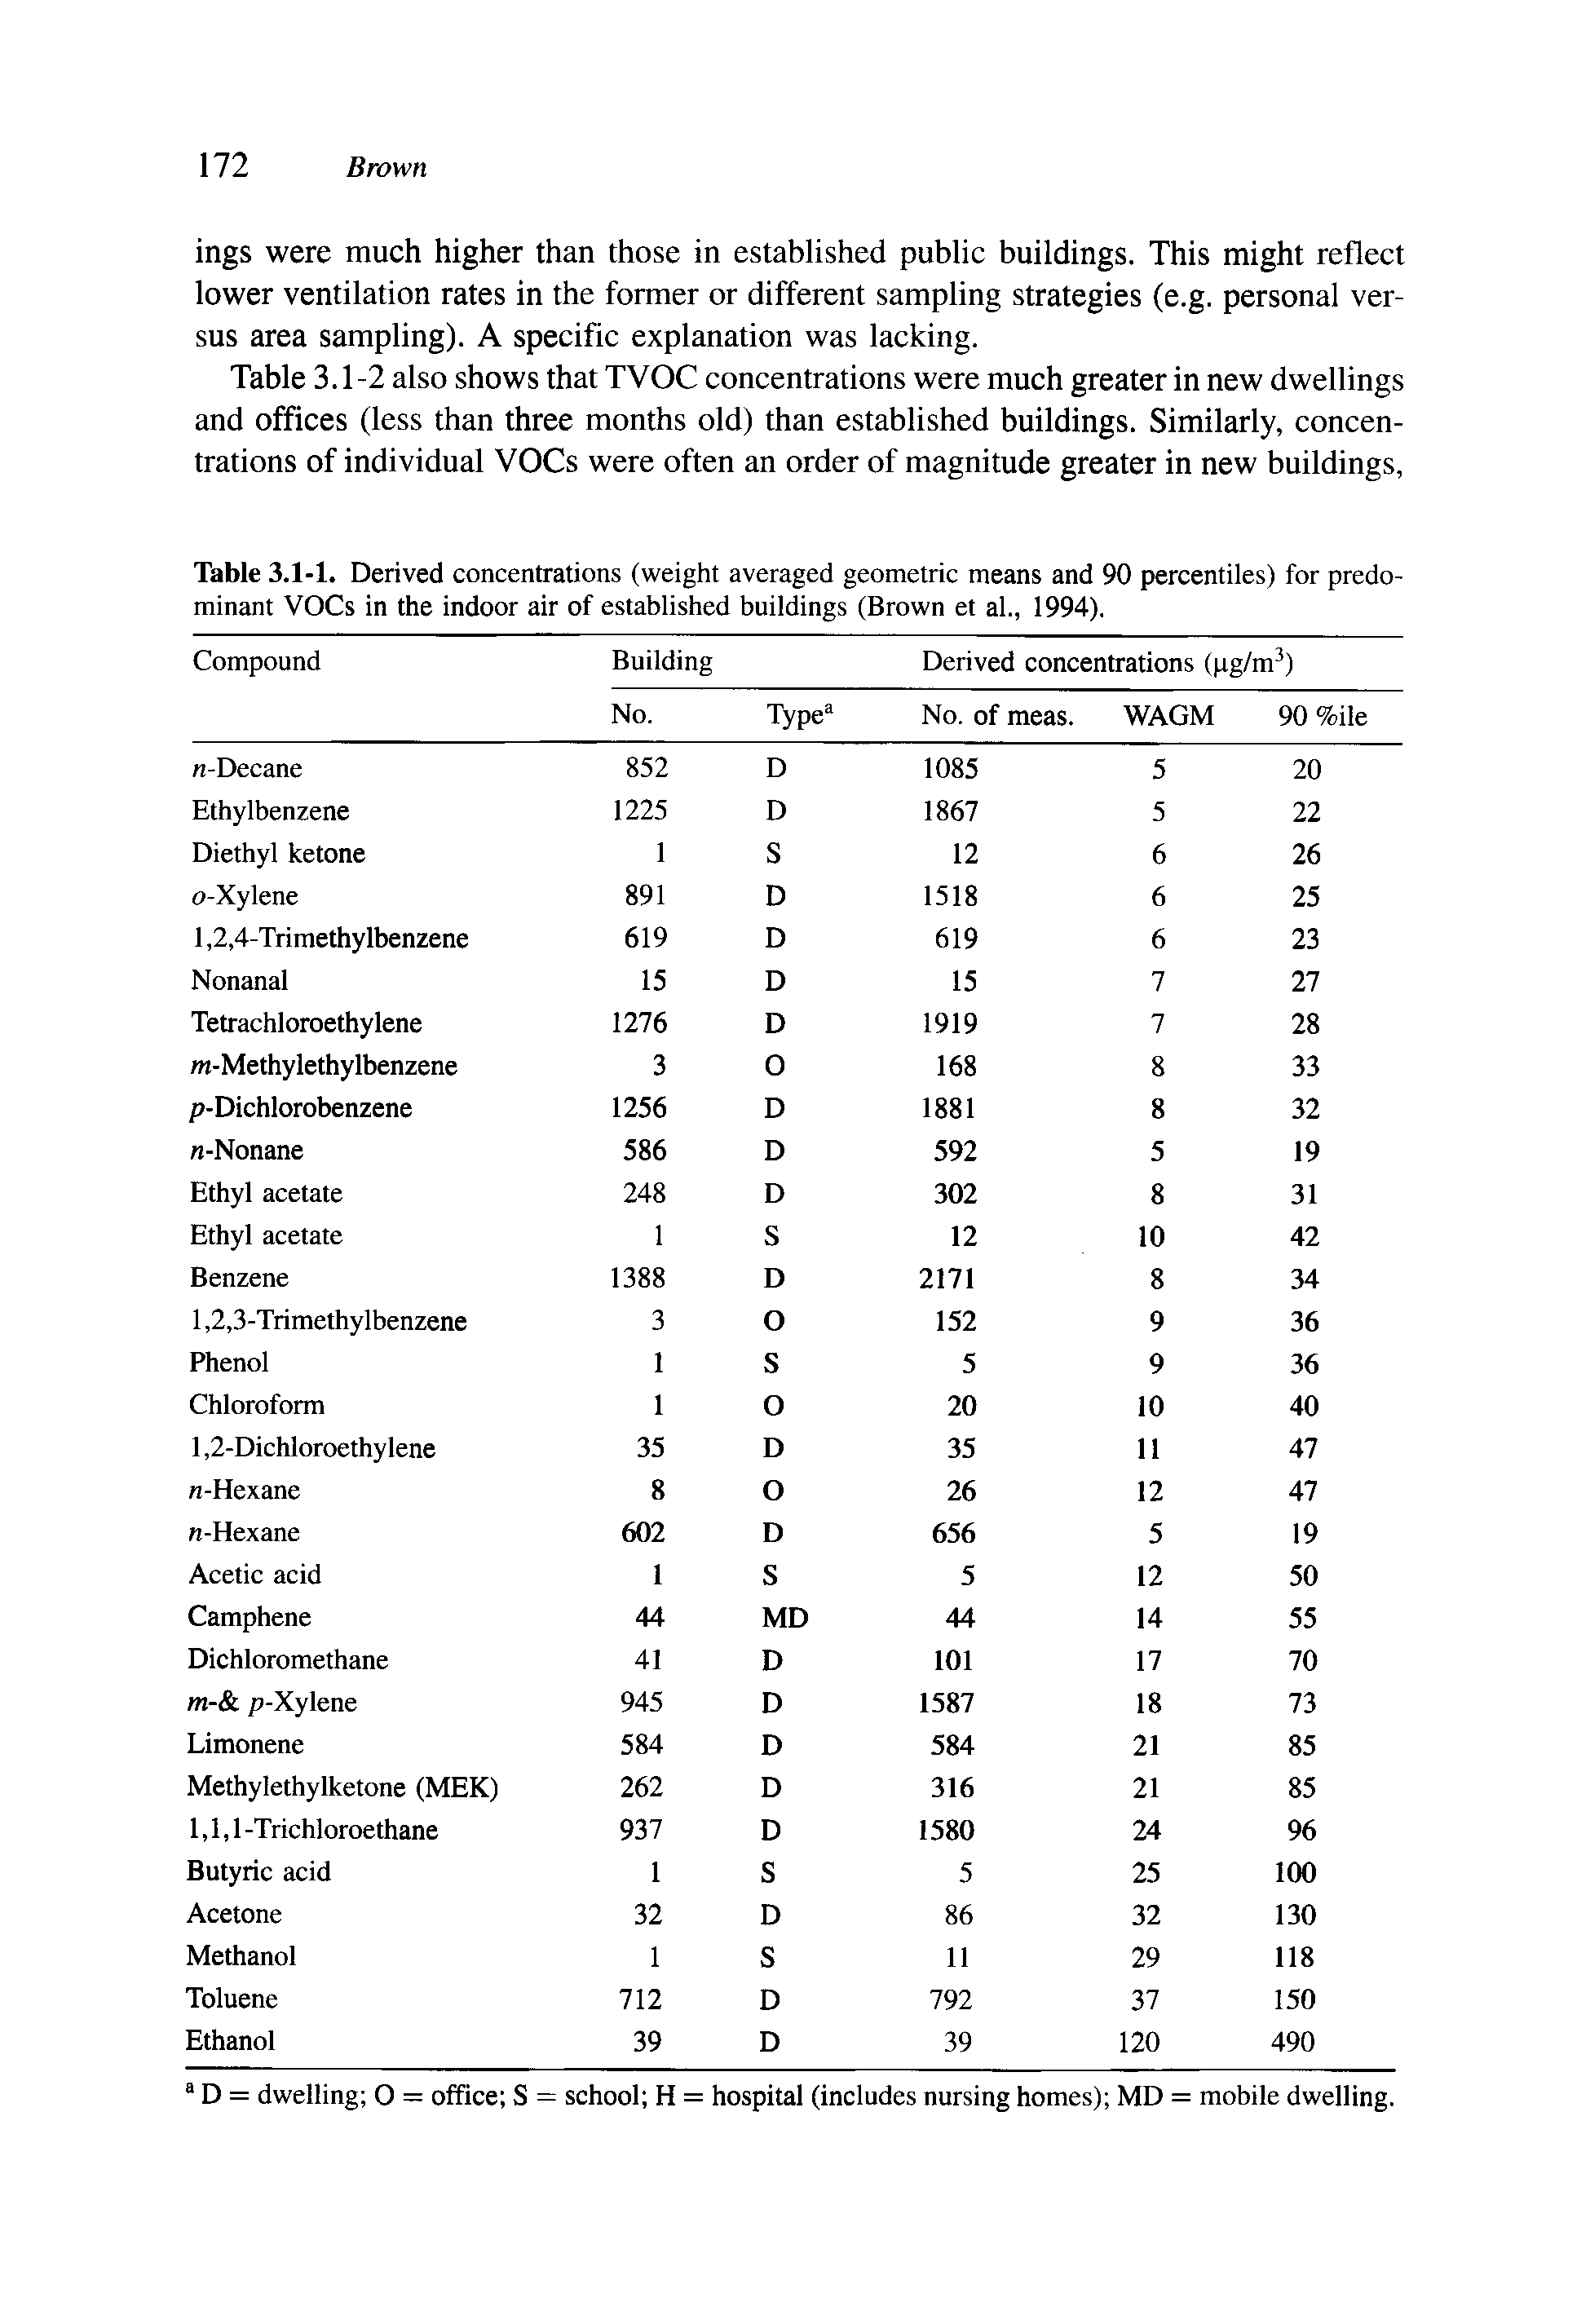 Table 3.1-1. Derived concentrations (weight averaged geometric means and 90 percentiles) for predominant VOCs in the indoor air of established buildings (Brown et ah, 1994).